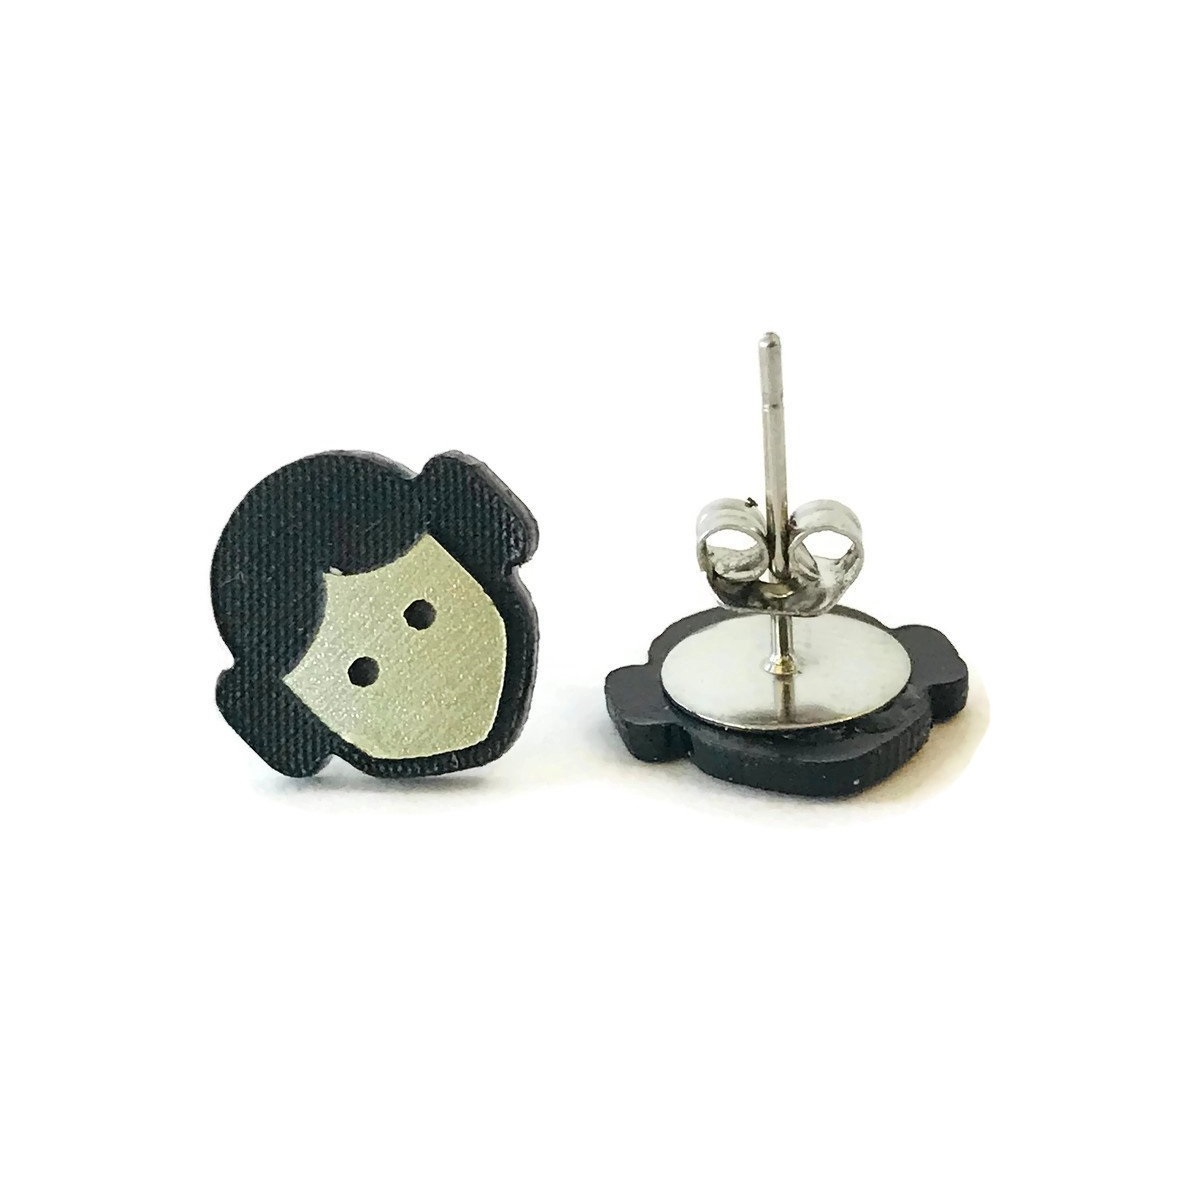 Star Wars Princess Leia Stud Earrings by Penny Accessories on Etsy